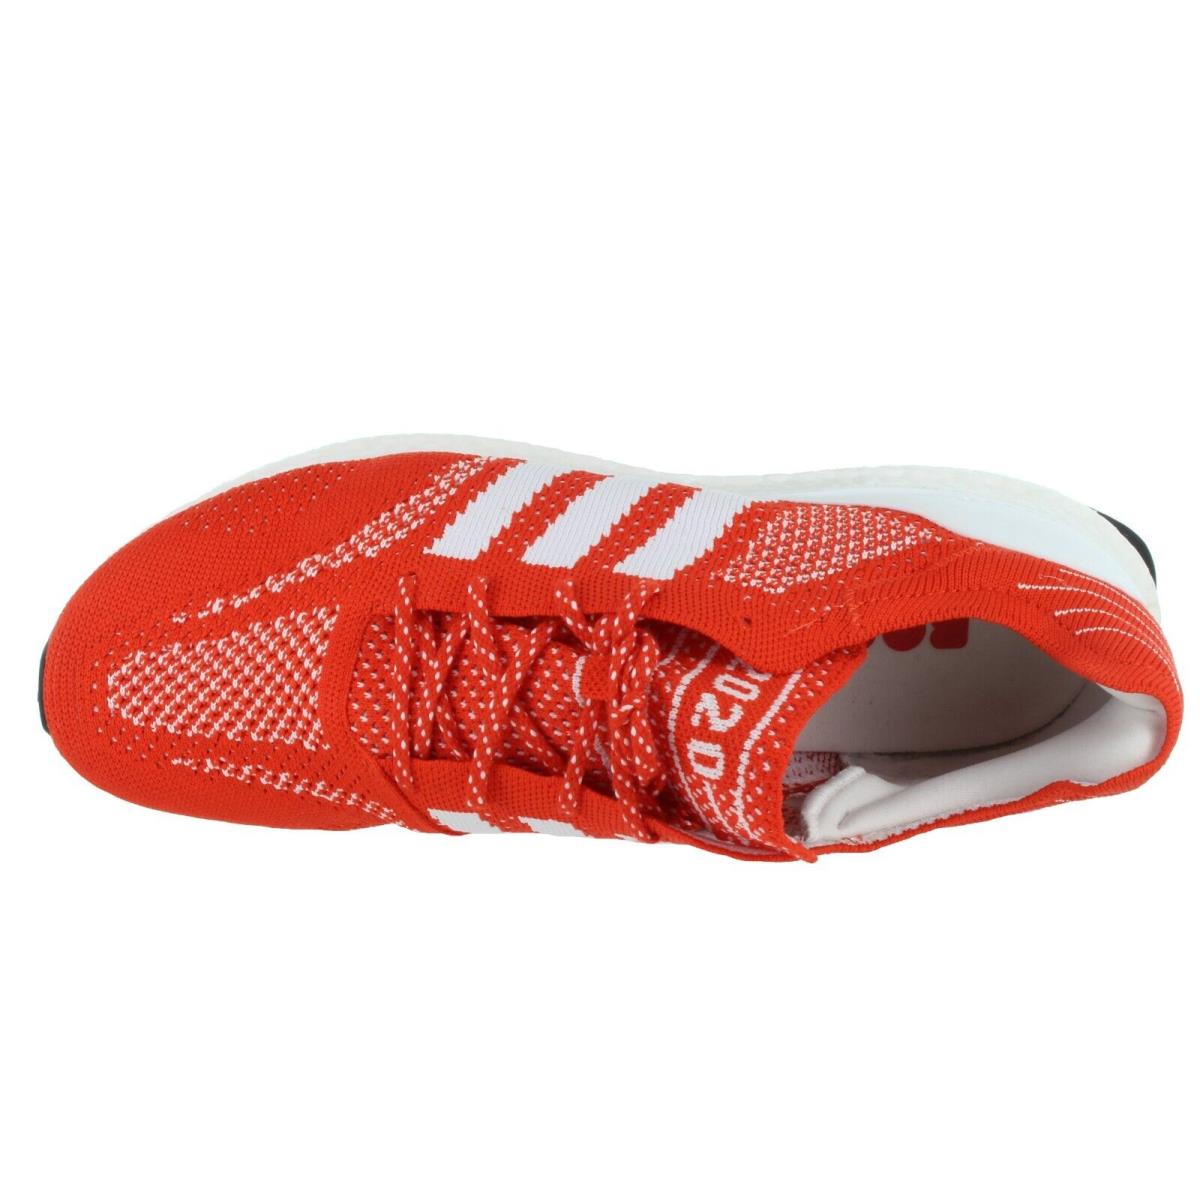 Adidas shoes Ultraboost DNA Prime - Active Red, Cloud White, Core Black 3